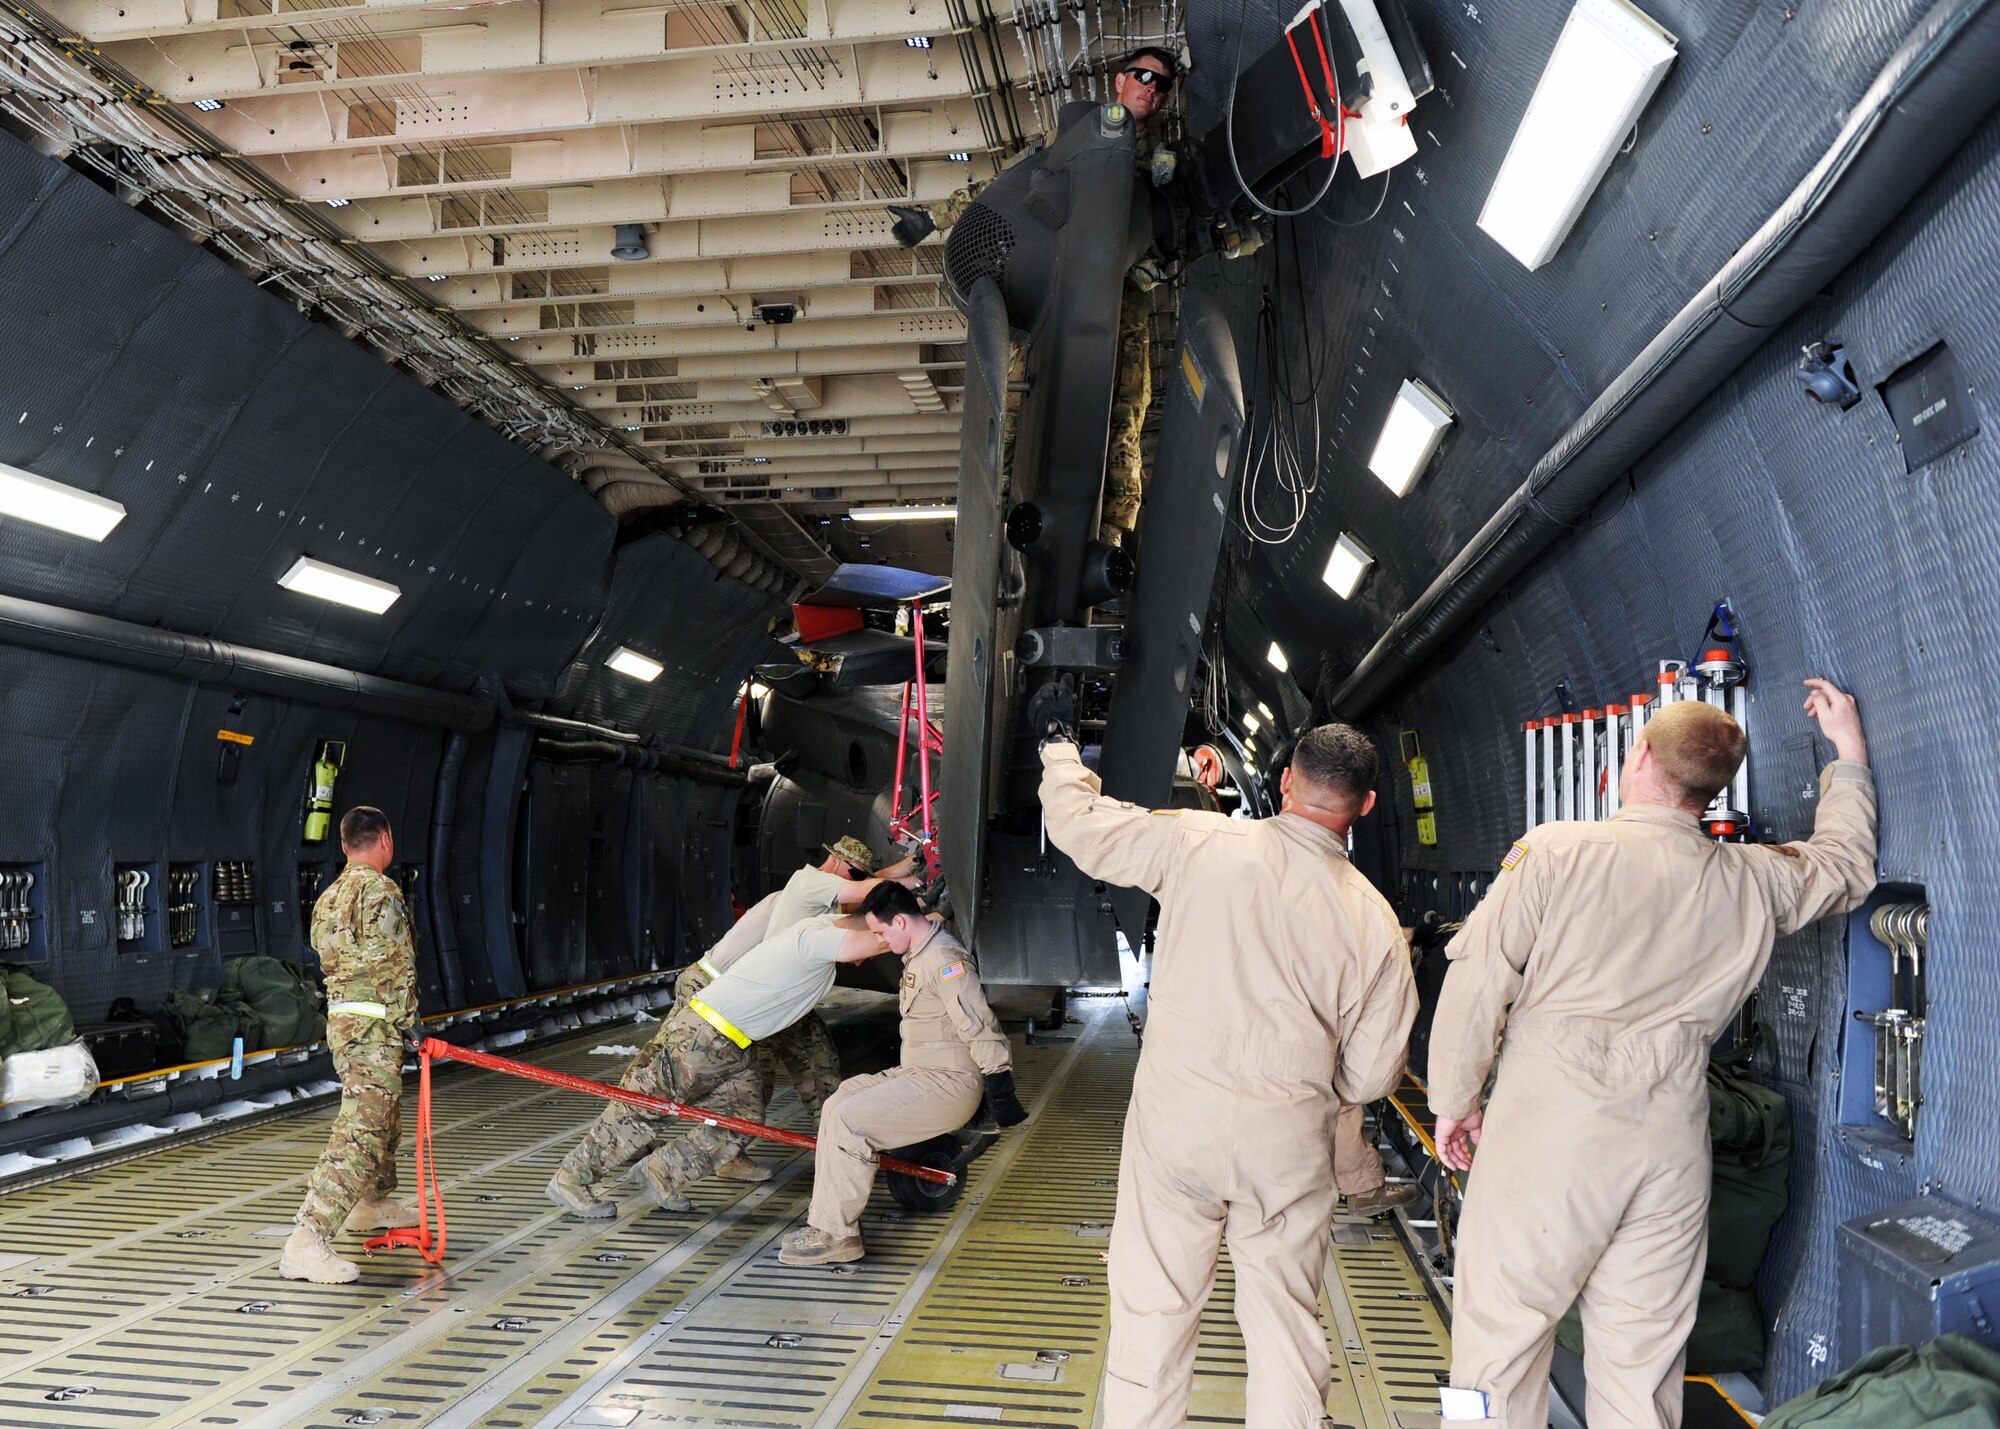 U.S. Soldiers assigned to the 96th Aviation Support Battalion, 101st Combat Aviation Brigade, and Airmen assigned to the 9th Airlift Squadron from Dover Air Force Base, Del., work together to spot and position an Army UH-60 Black Hawk helicopter during an upload onto a C-5 Super Galaxy aircraft April 26, 2015 at Bagram Airfield, Afghanistan. Throughout April, several helicopters were uploaded and transported to the United States to facilitate the swap out of the Army’s 82nd and 101st Combat Aviation Brigades. (U.S. Air Force photo by Staff Sgt. Whitney Amstutz/Released)